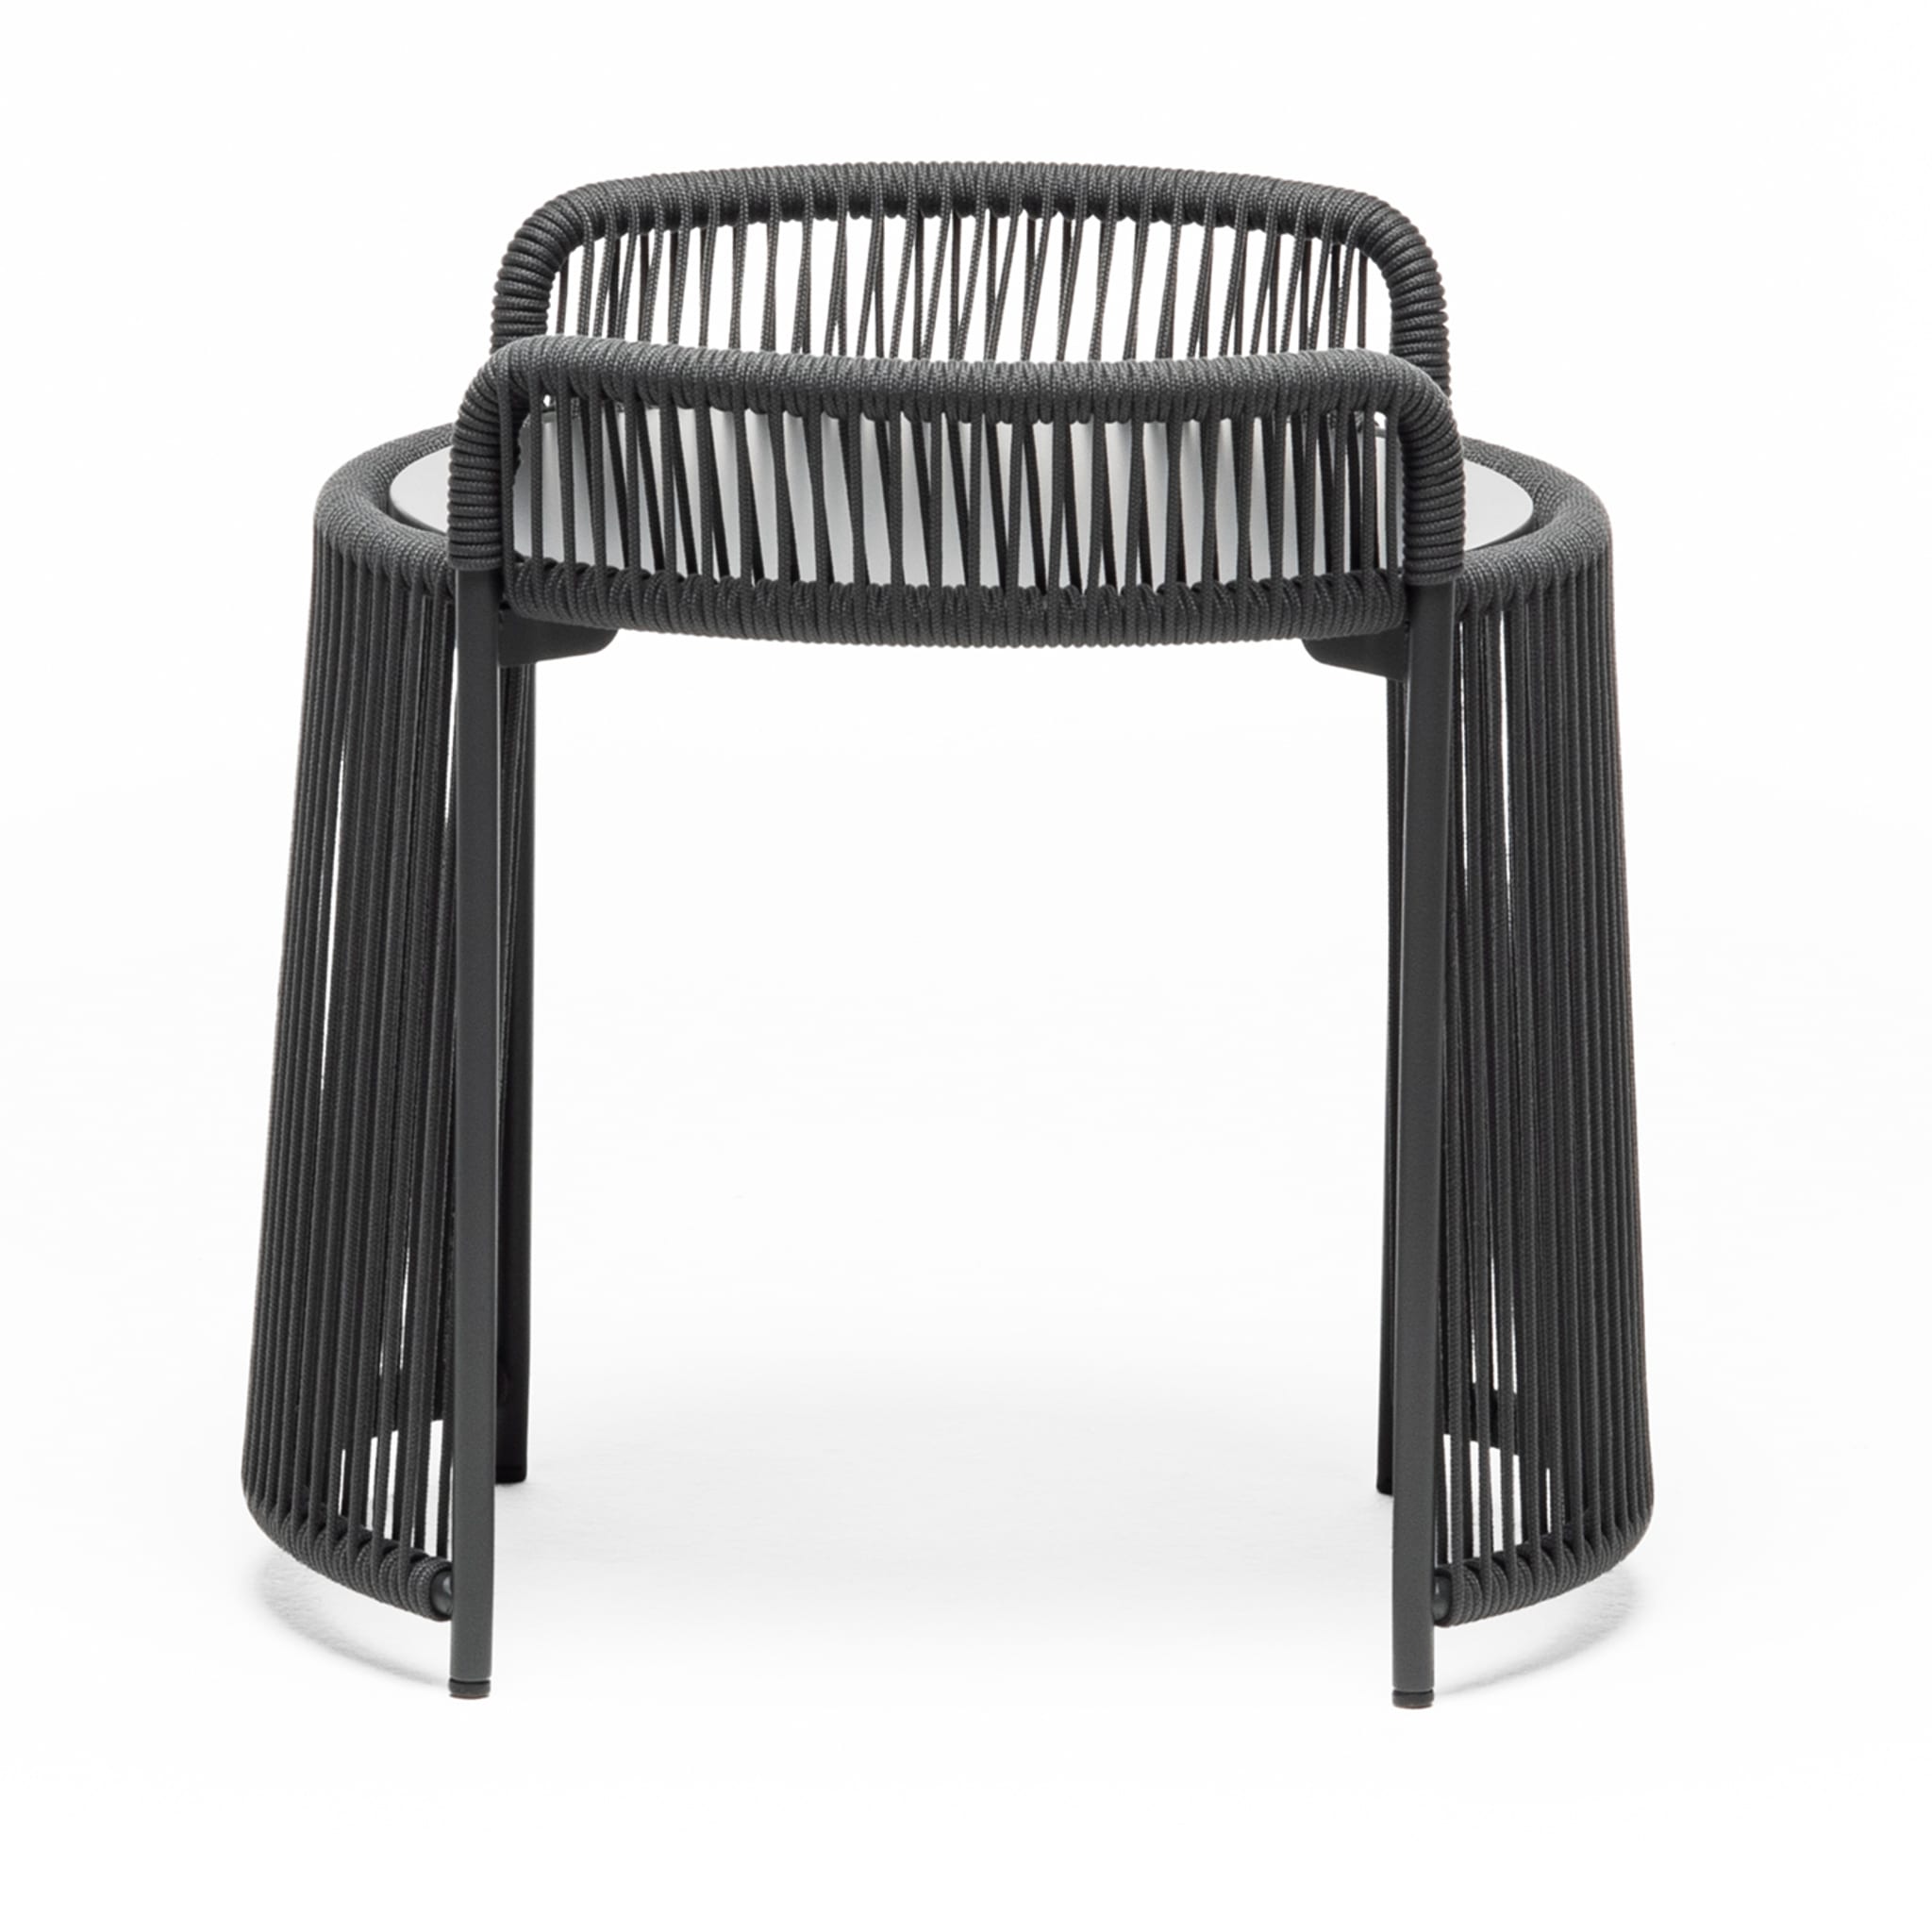 Altana Small Round Anthracite Coffee Table by Antonio De Marco - Alternative view 2